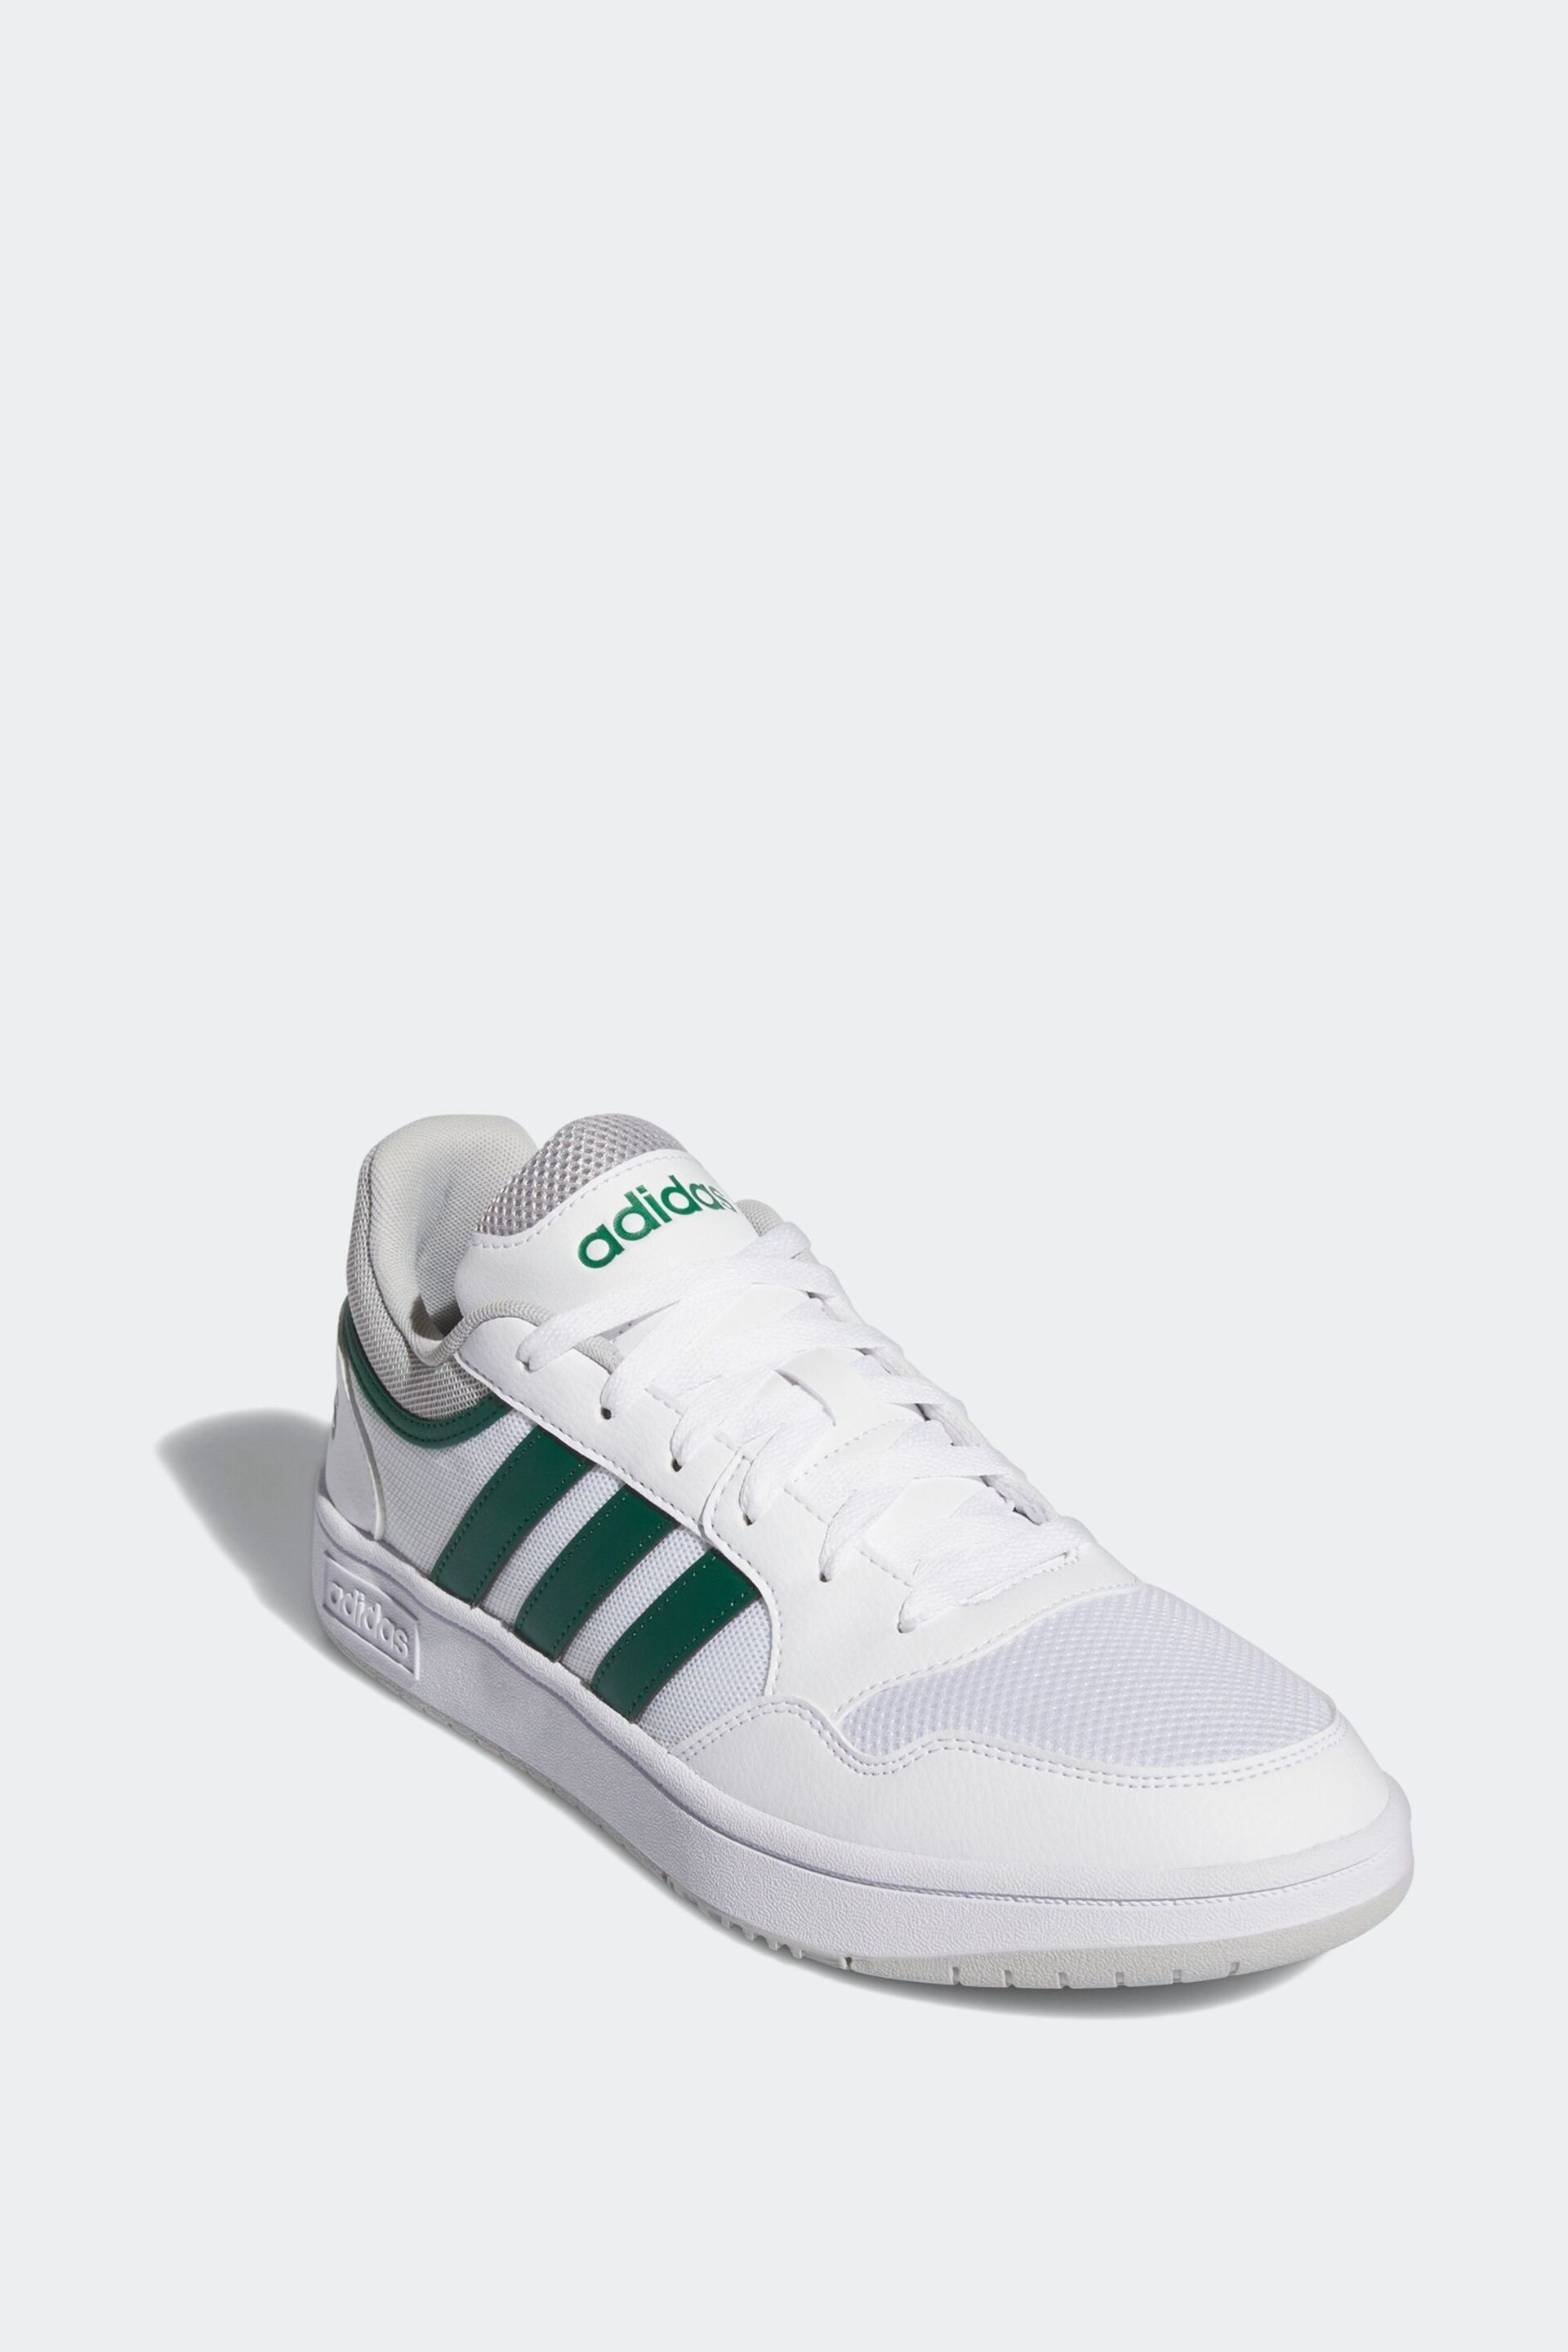 adidas Originals White Hoops 3.0 Summer Trainers - Image 3 of 9